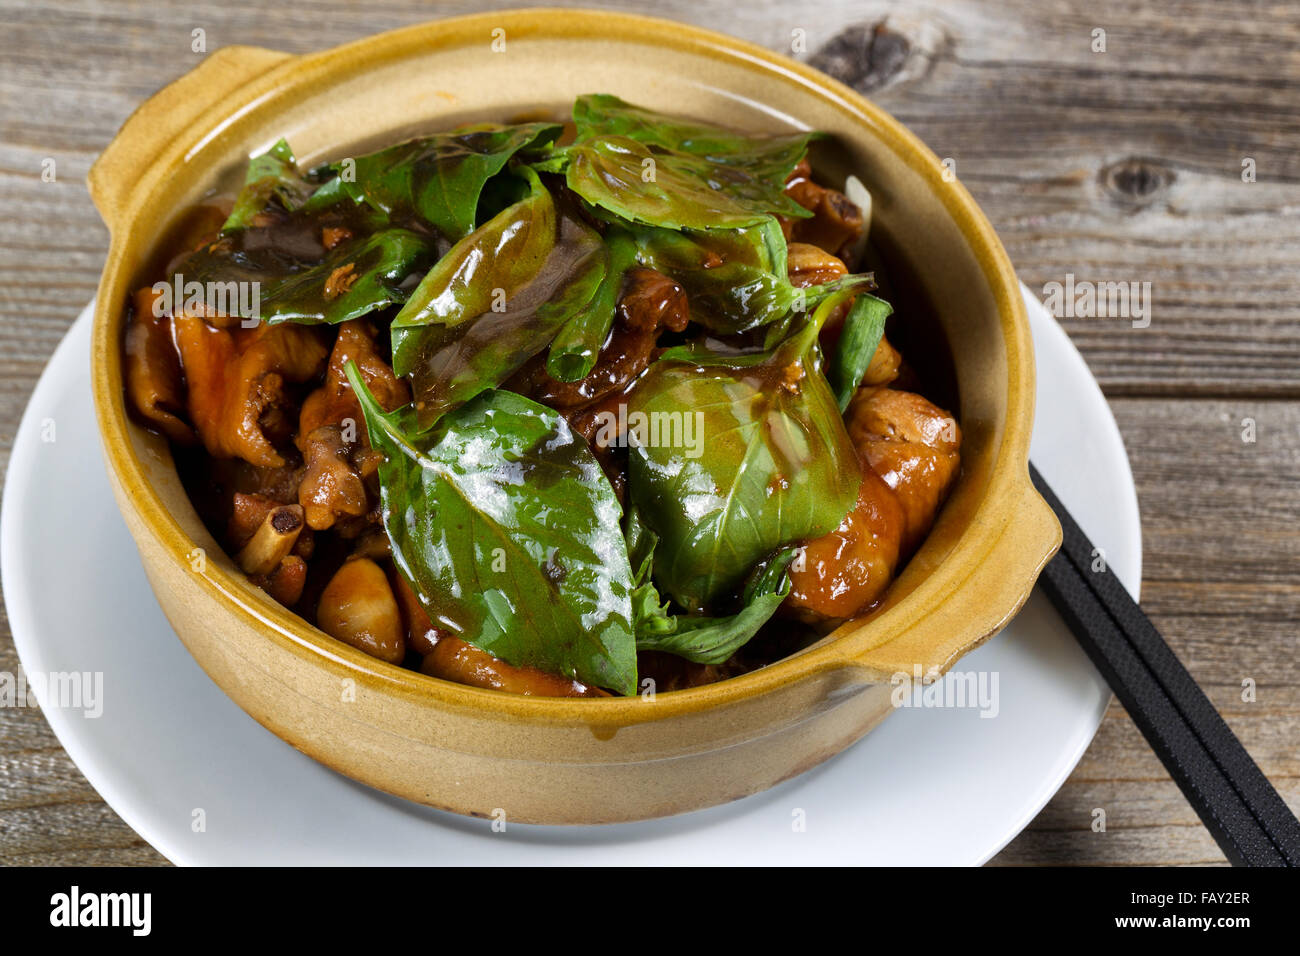 Close up front view of chicken and basil dish. Chopsticks on white plate underneath bowl on rustic wood background. Stock Photo